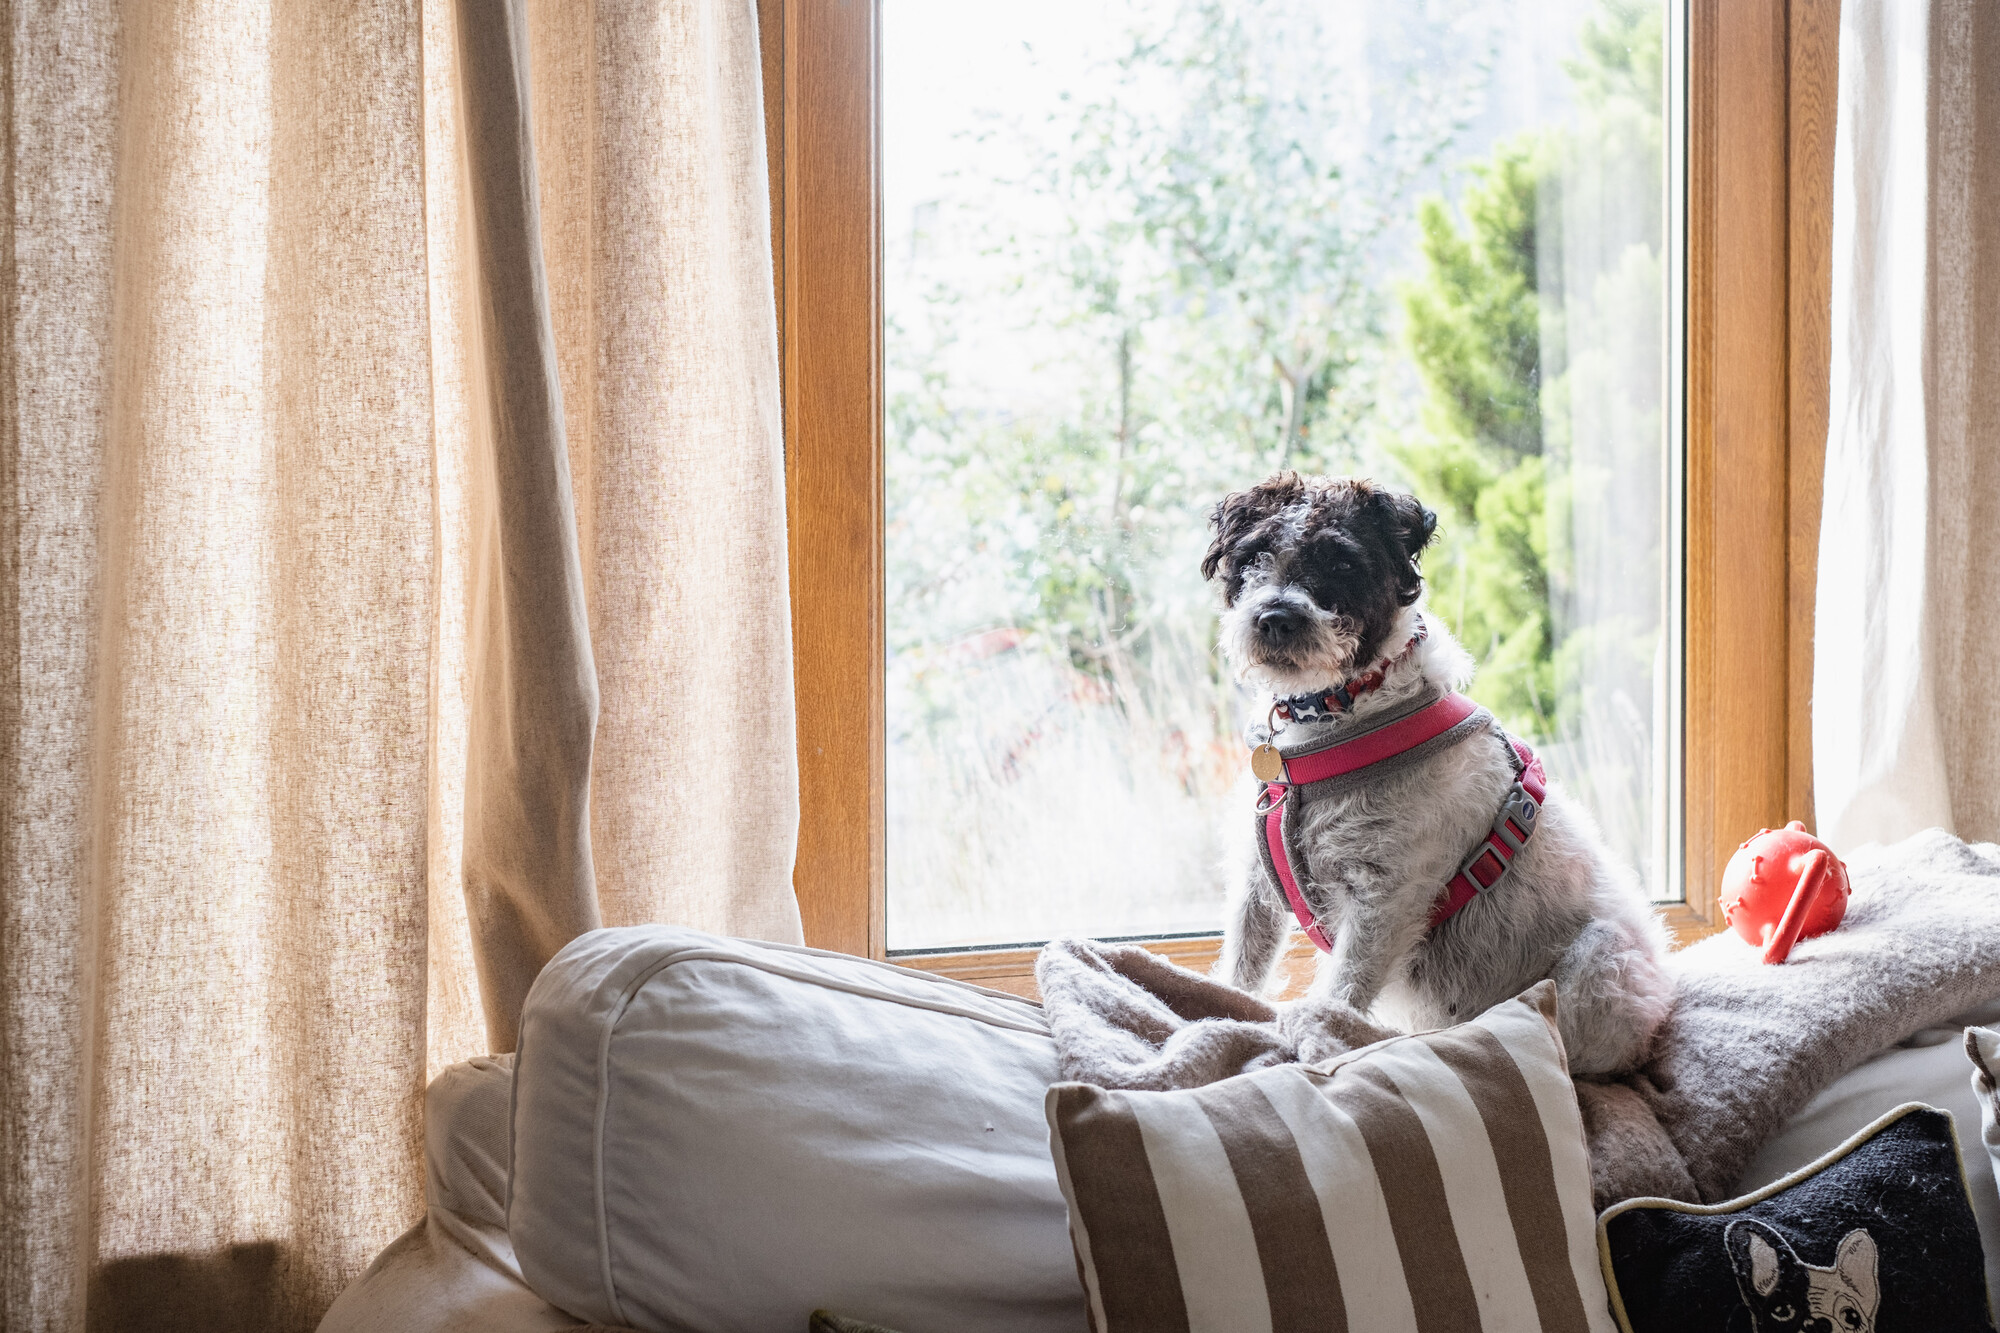 A black and white terrier sits on a sofa by the window, wearing a red harness.